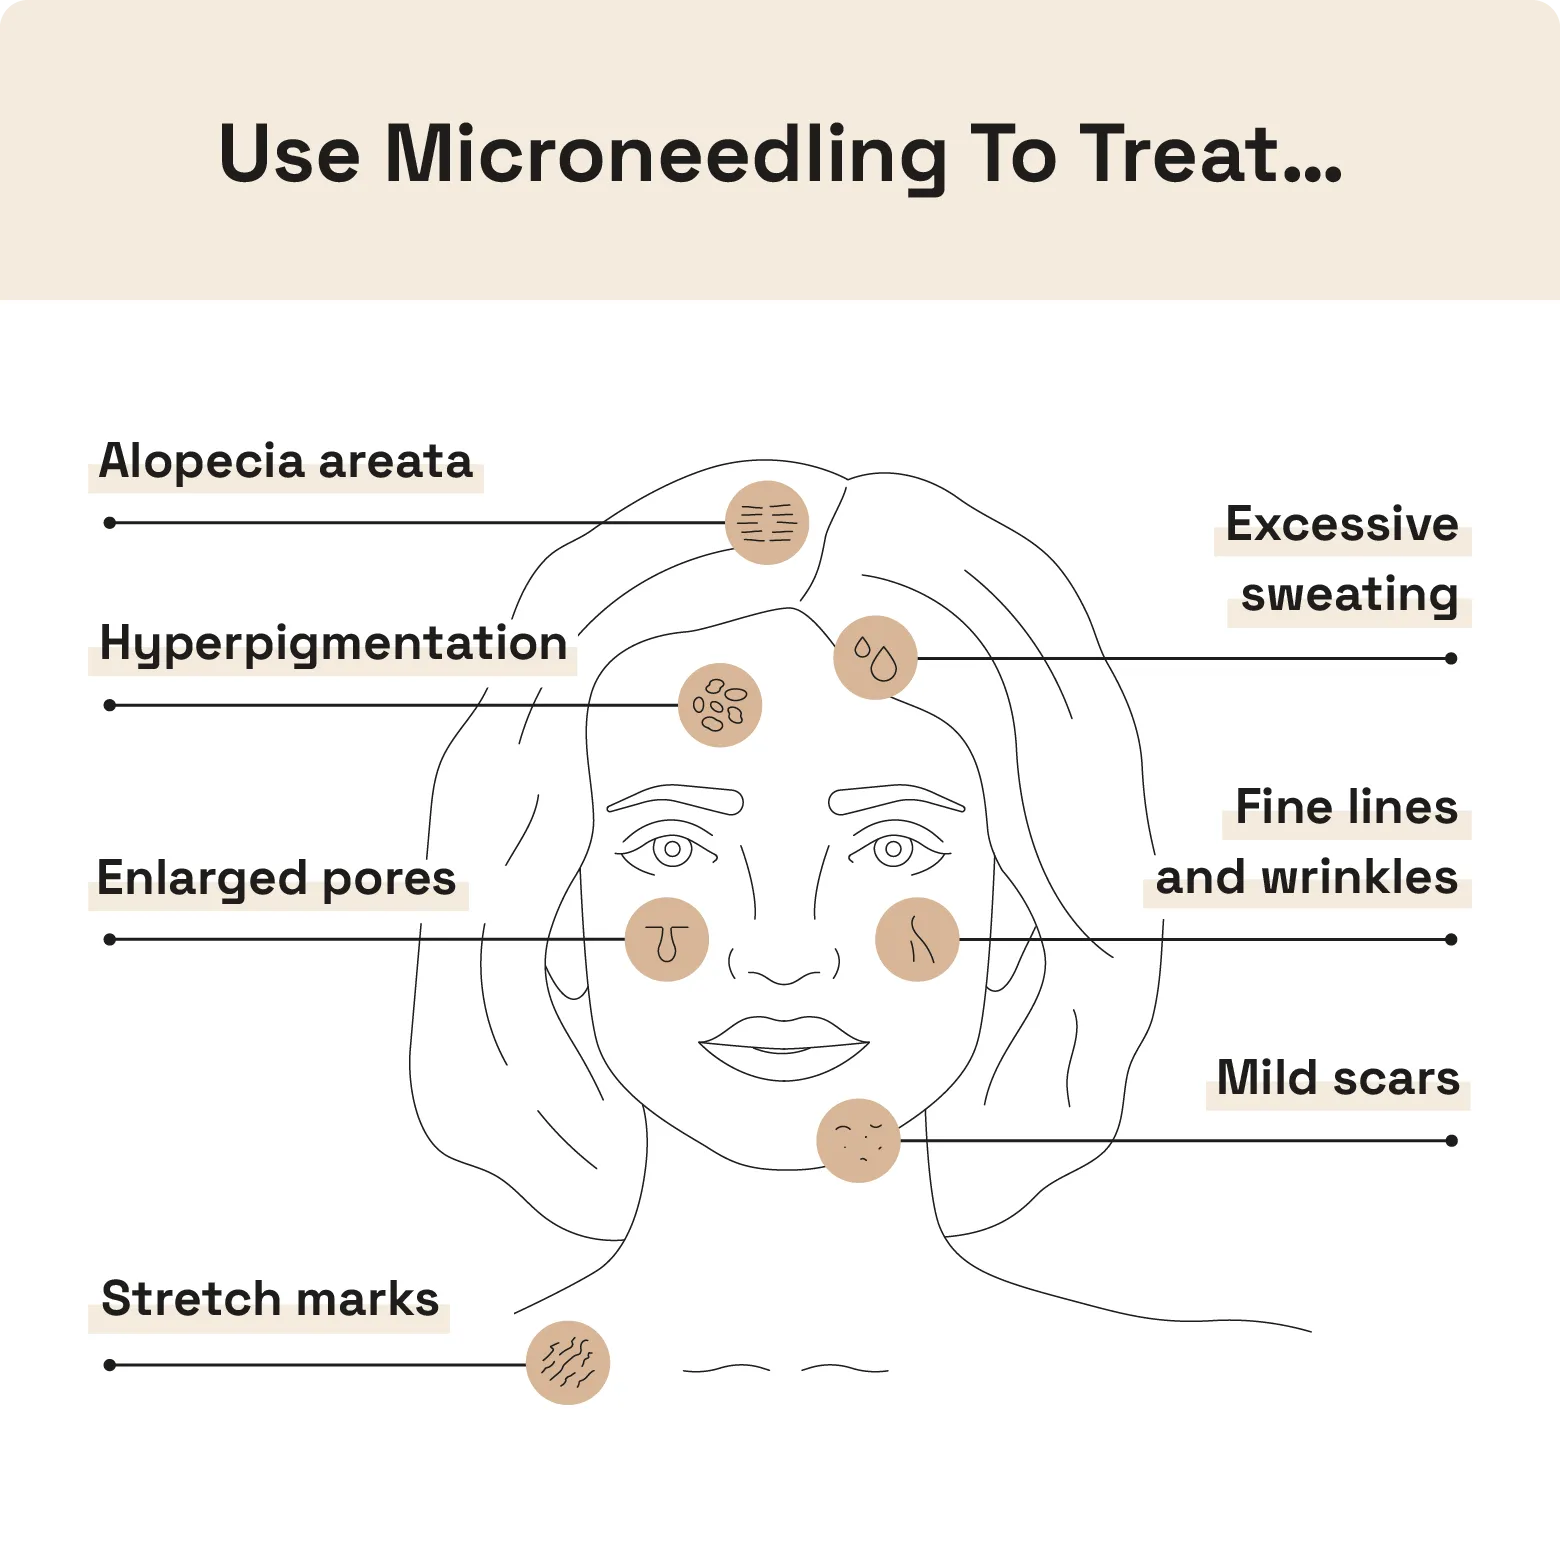 Image shows the skin concerns microneedling treats. 